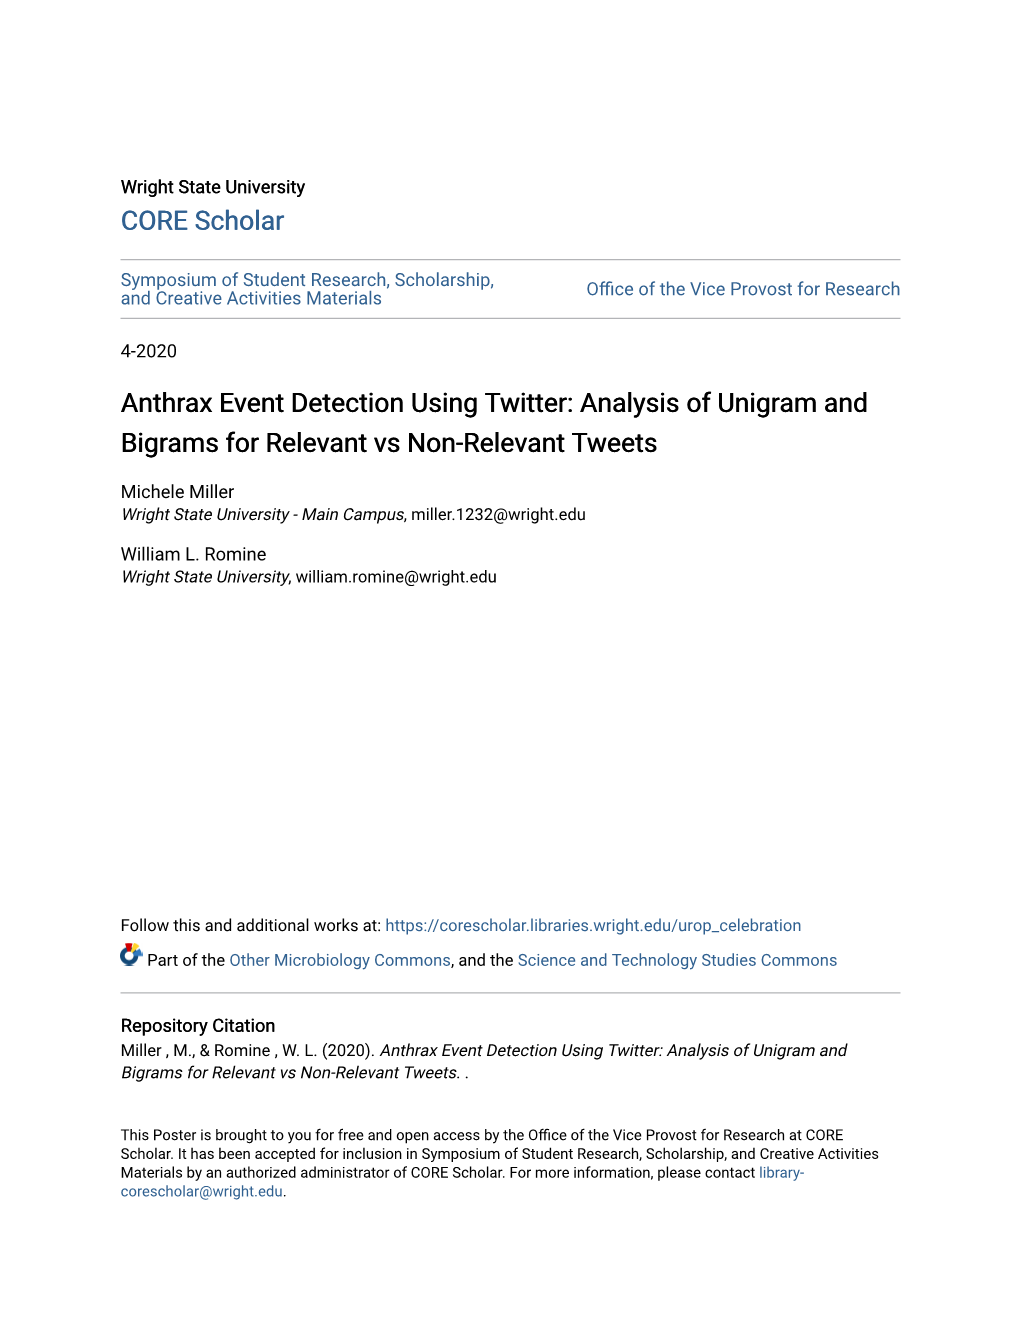 Anthrax Event Detection Using Twitter: Analysis of Unigram and Bigrams for Relevant Vs Non-Relevant Tweets